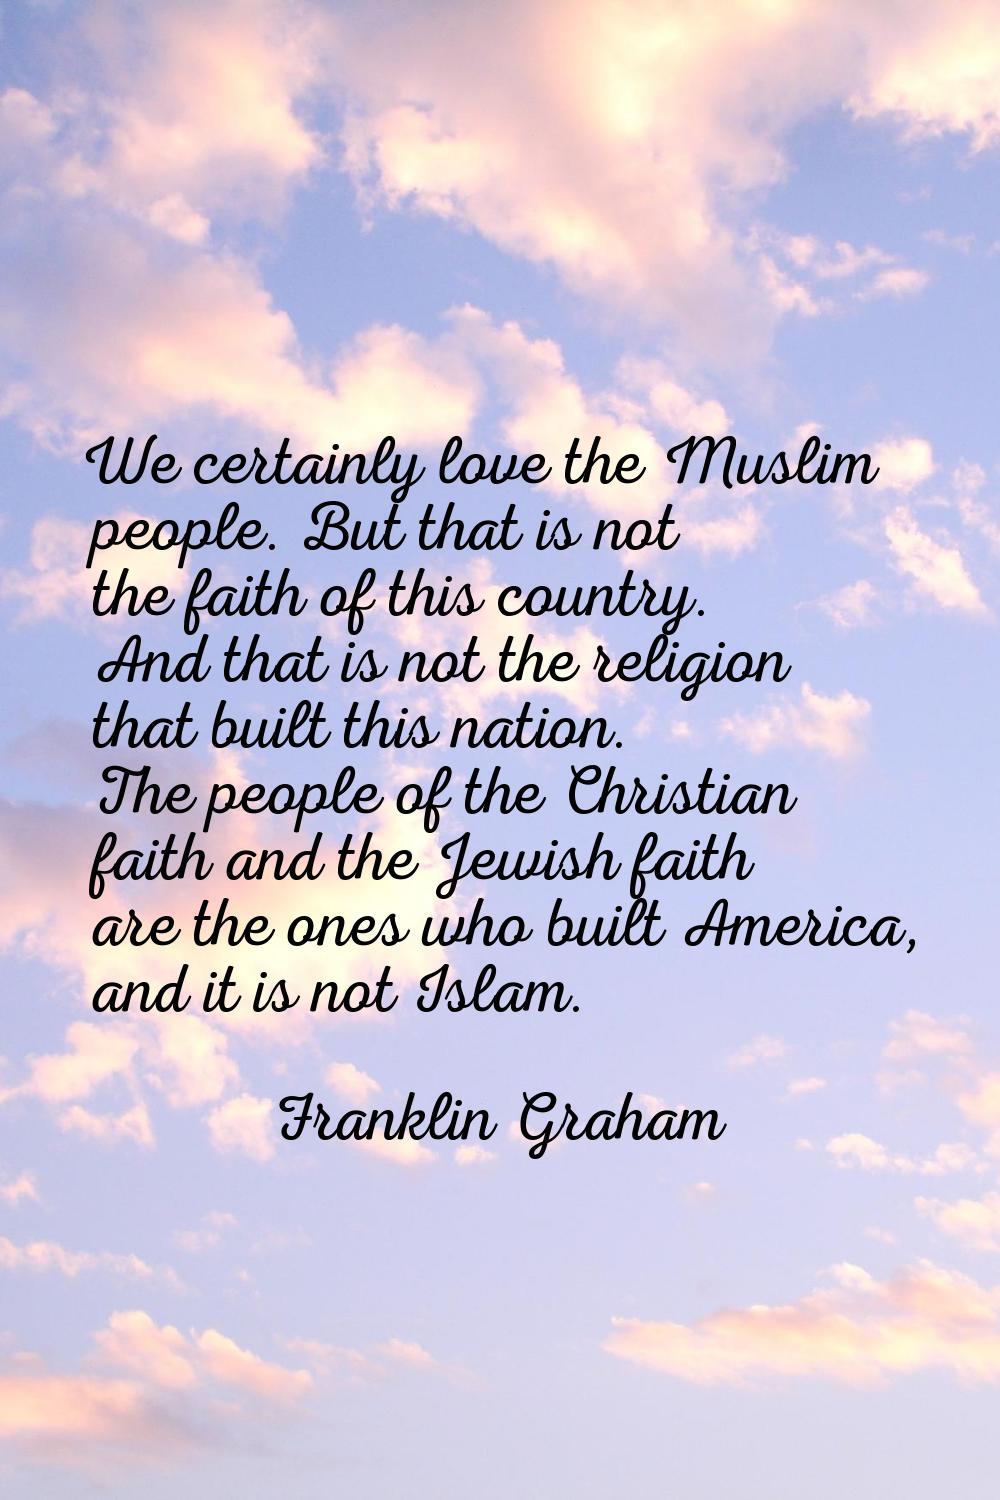 We certainly love the Muslim people. But that is not the faith of this country. And that is not the